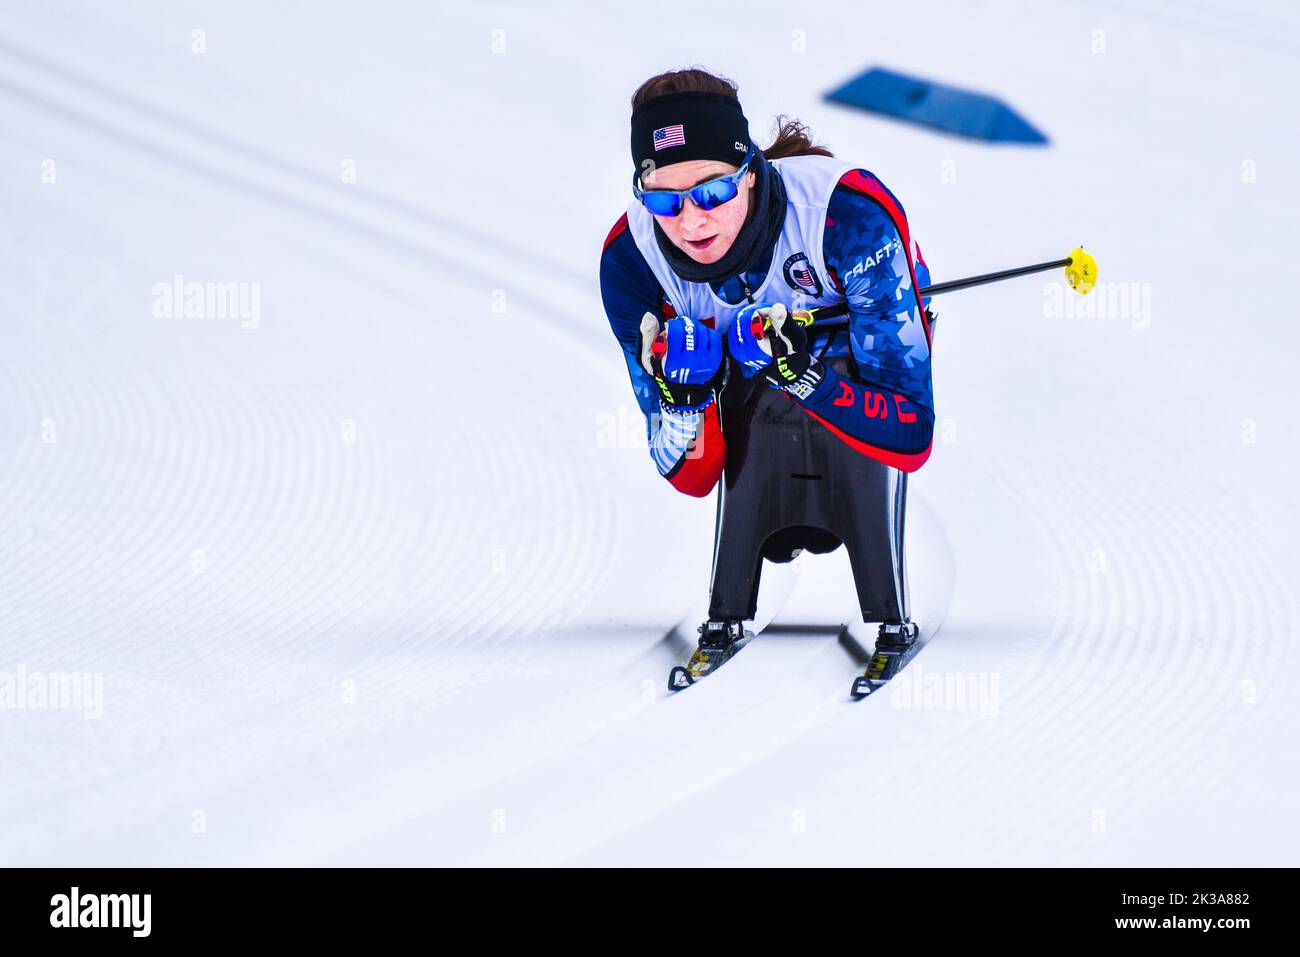 Athlete Kendall Gretsch tucks a downhill at the 2019 U.S. Paralympic National Cross Country Ski Championships at Craftsbury Outdoor Center, VT, USA. Stock Photo